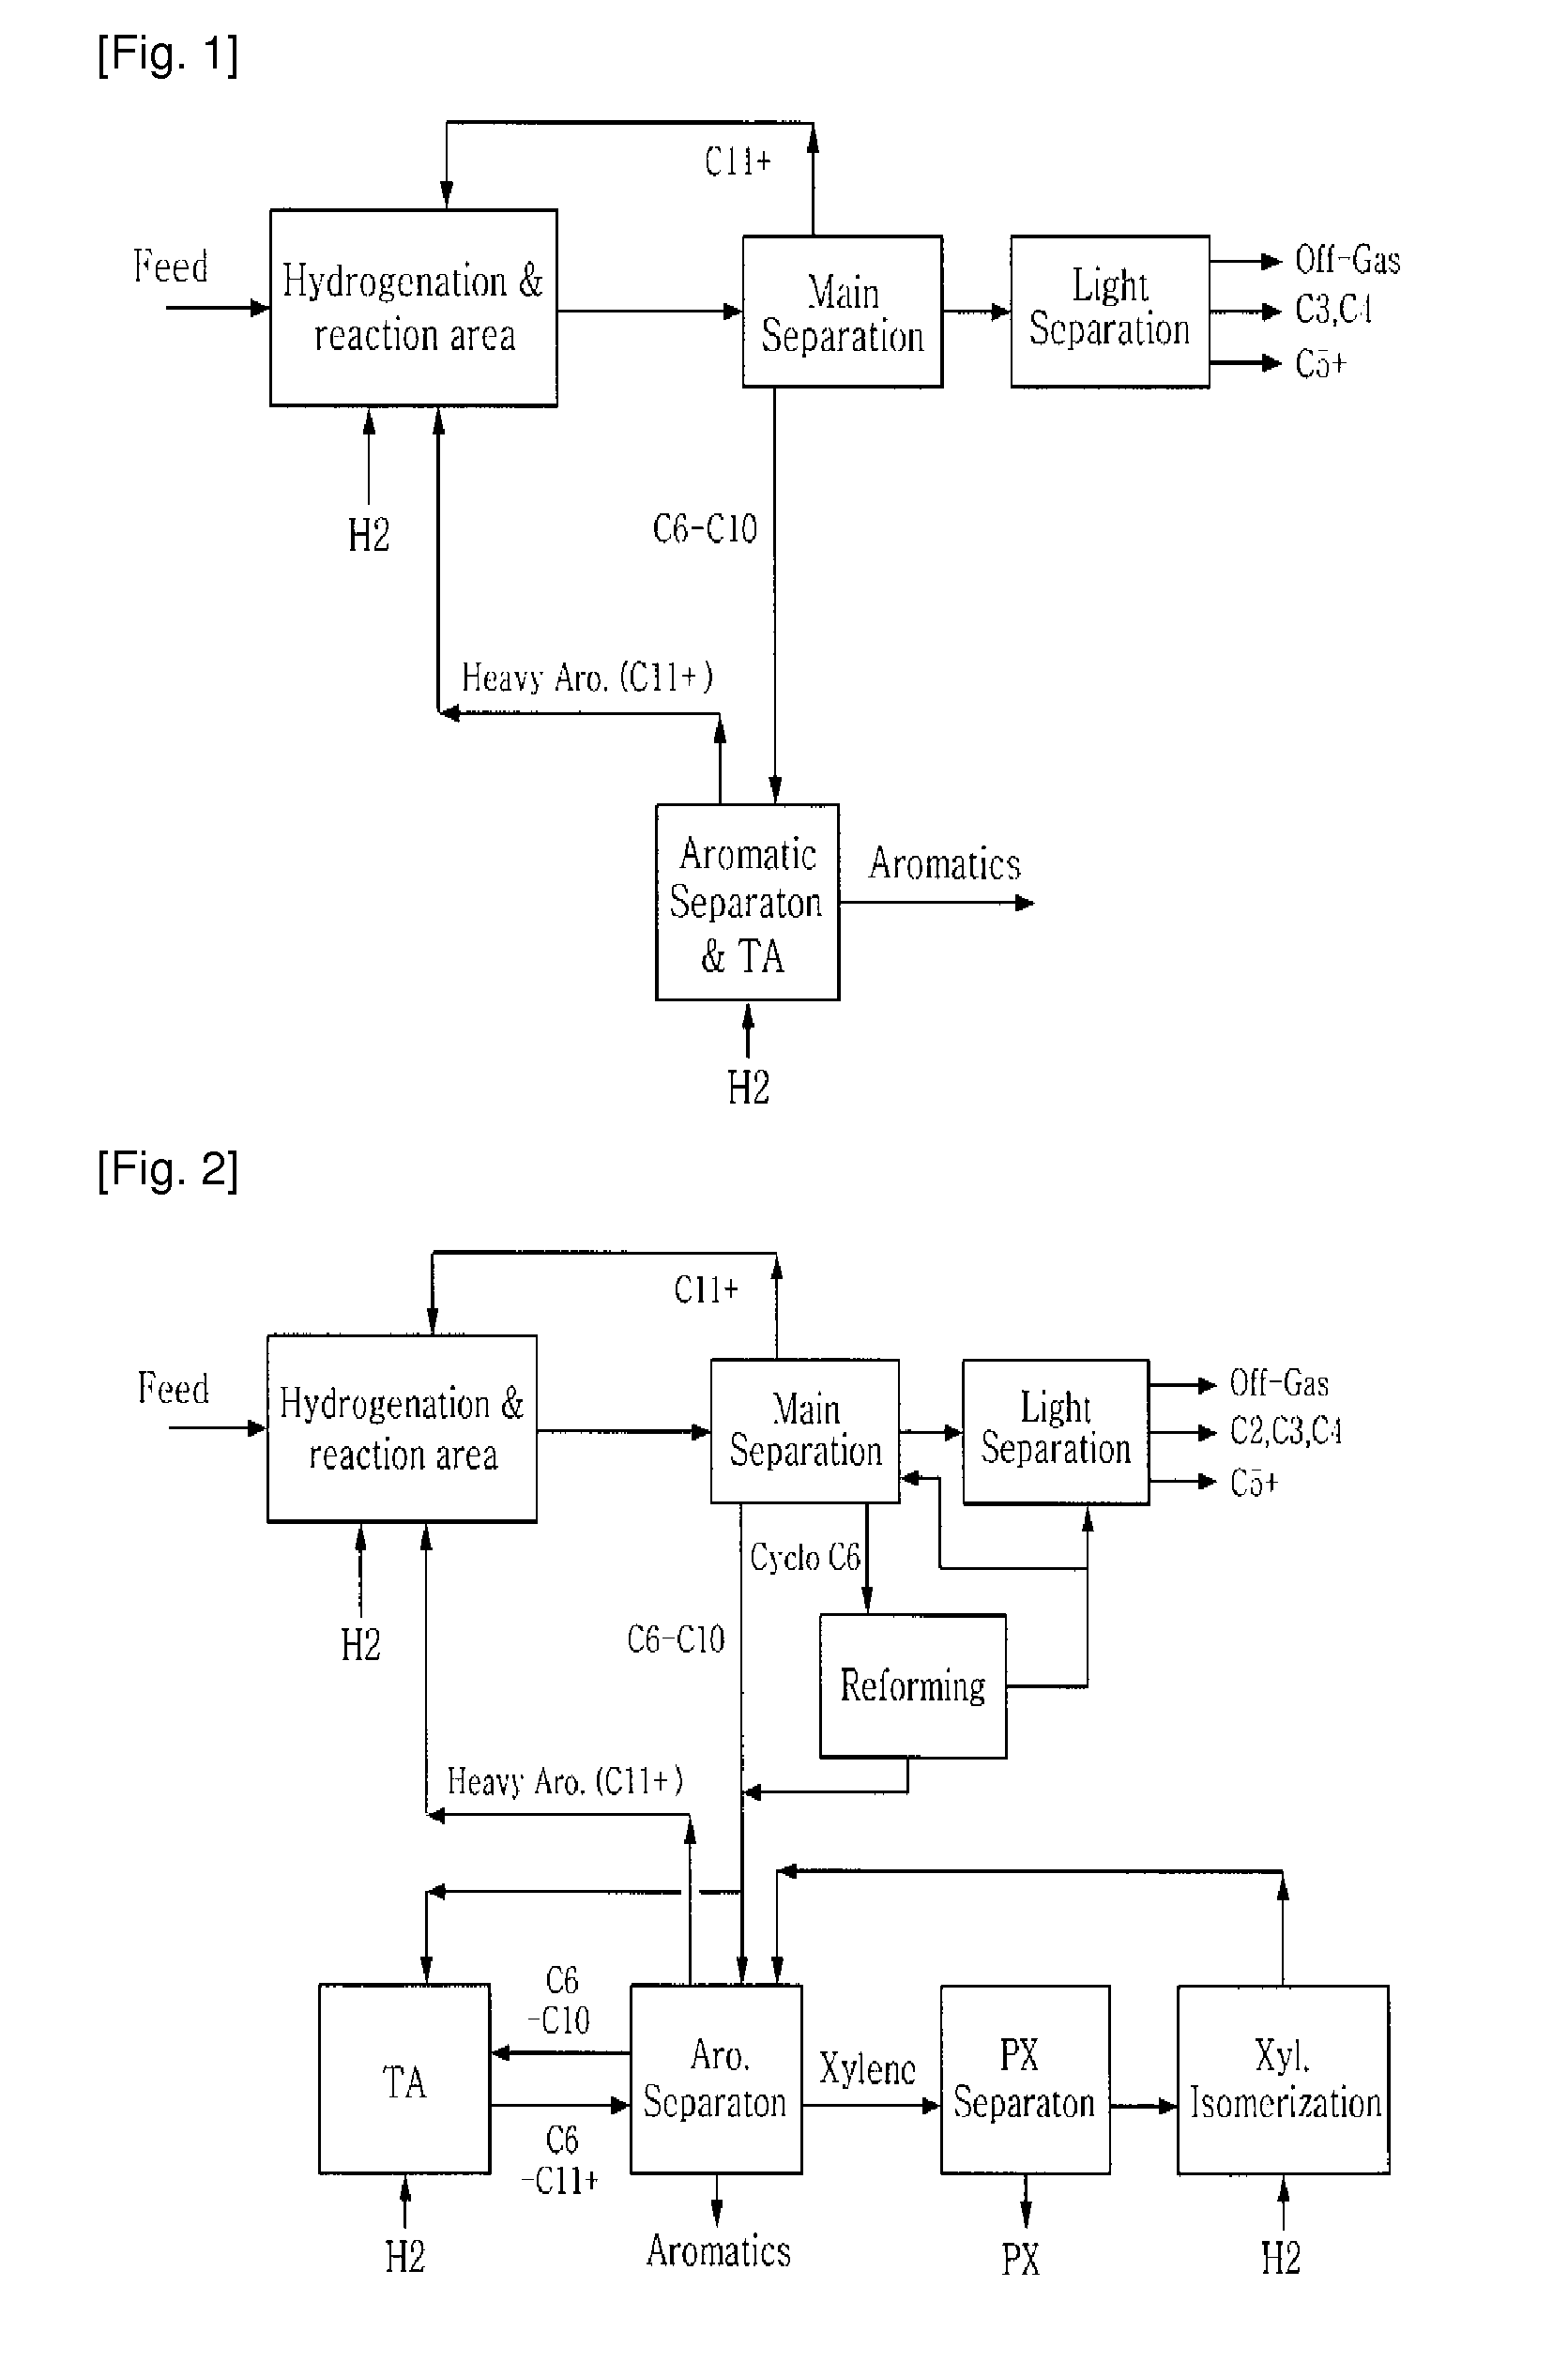 The method for producing valuable aromatics and light paraffins from hydrocarbonaceous oils derived from oil, coal or wood